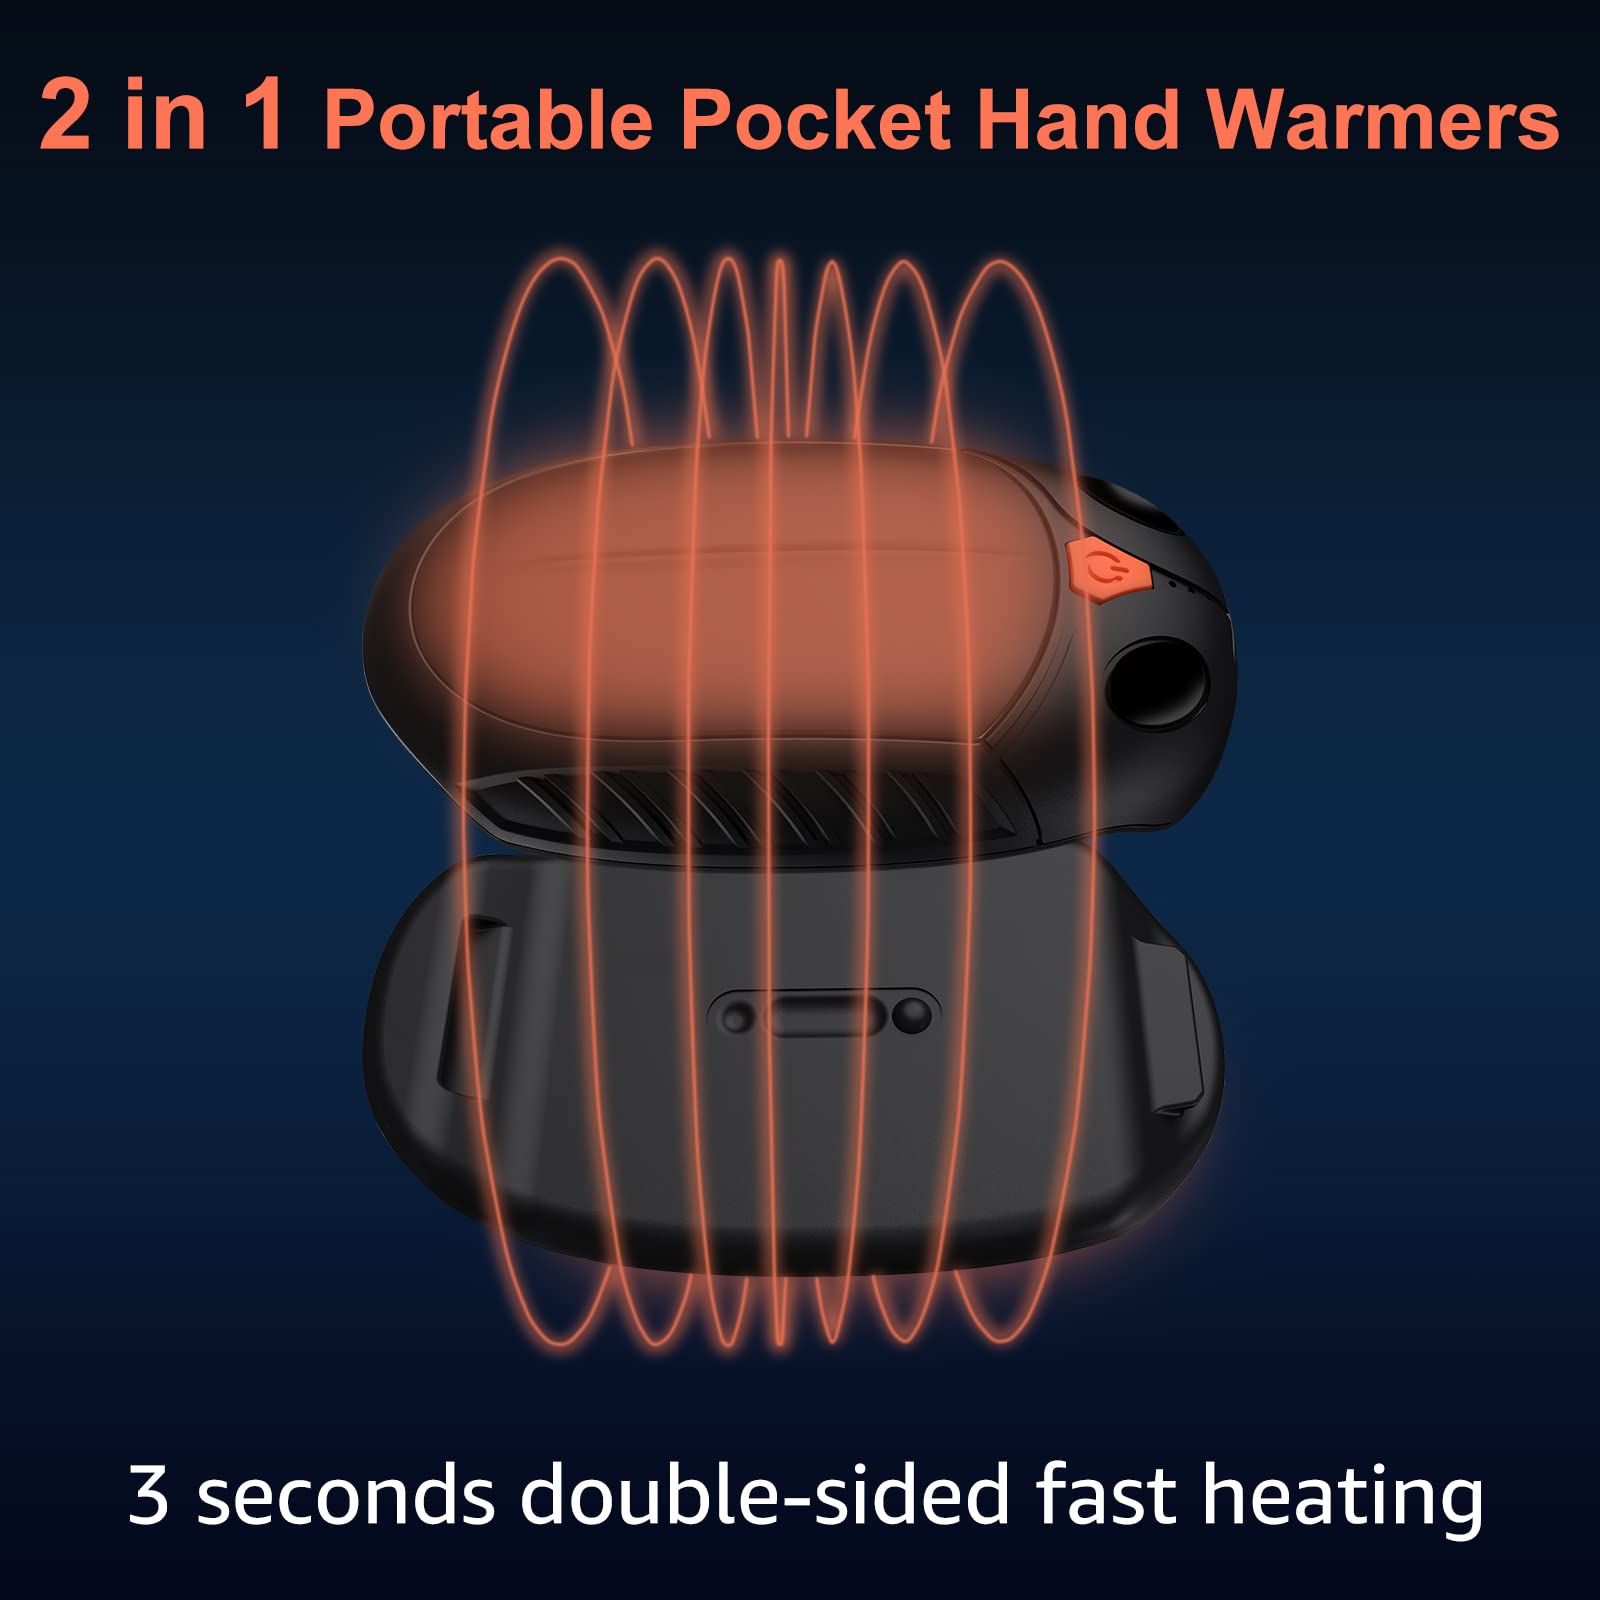 Hand Warmers Rechargeable, 2 in 1 Electric Handwarmers with 12Hrs Long Heating, Quick Charge Portable Pocket Hand Warmer Great Gift for Christmas Outdoors, Hunting, Golf, Camping